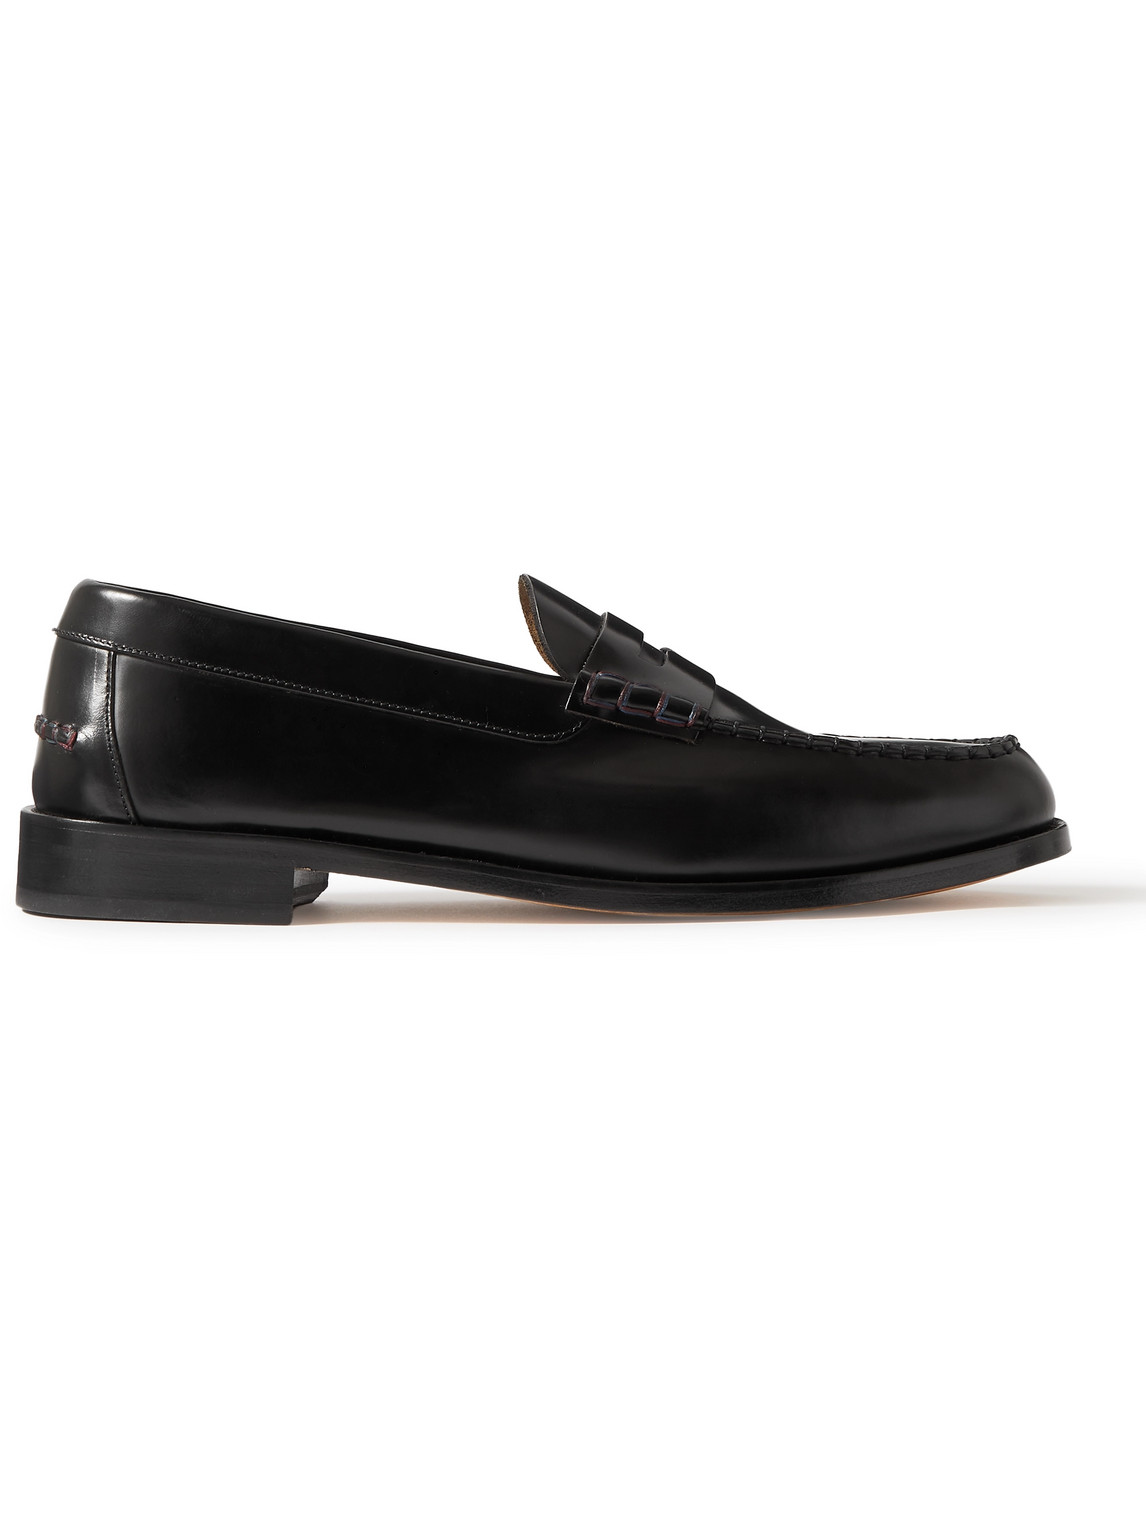 Paul Smith Lido Leather Loafers In 79 Blacks